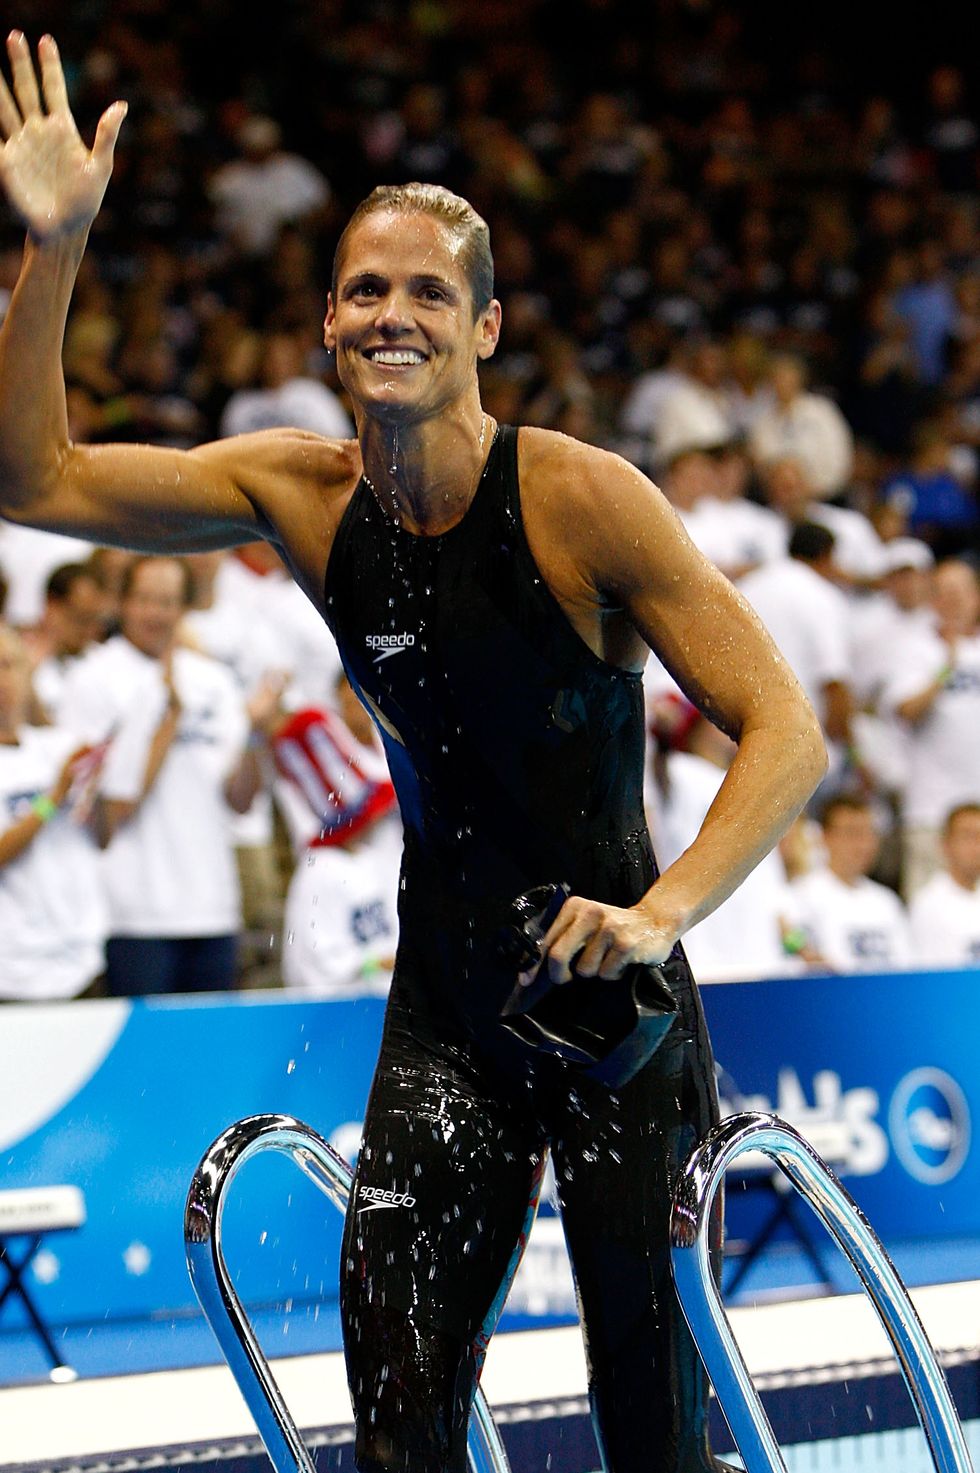 30 Athletes Who Have Come Out of Retirement Over the Years